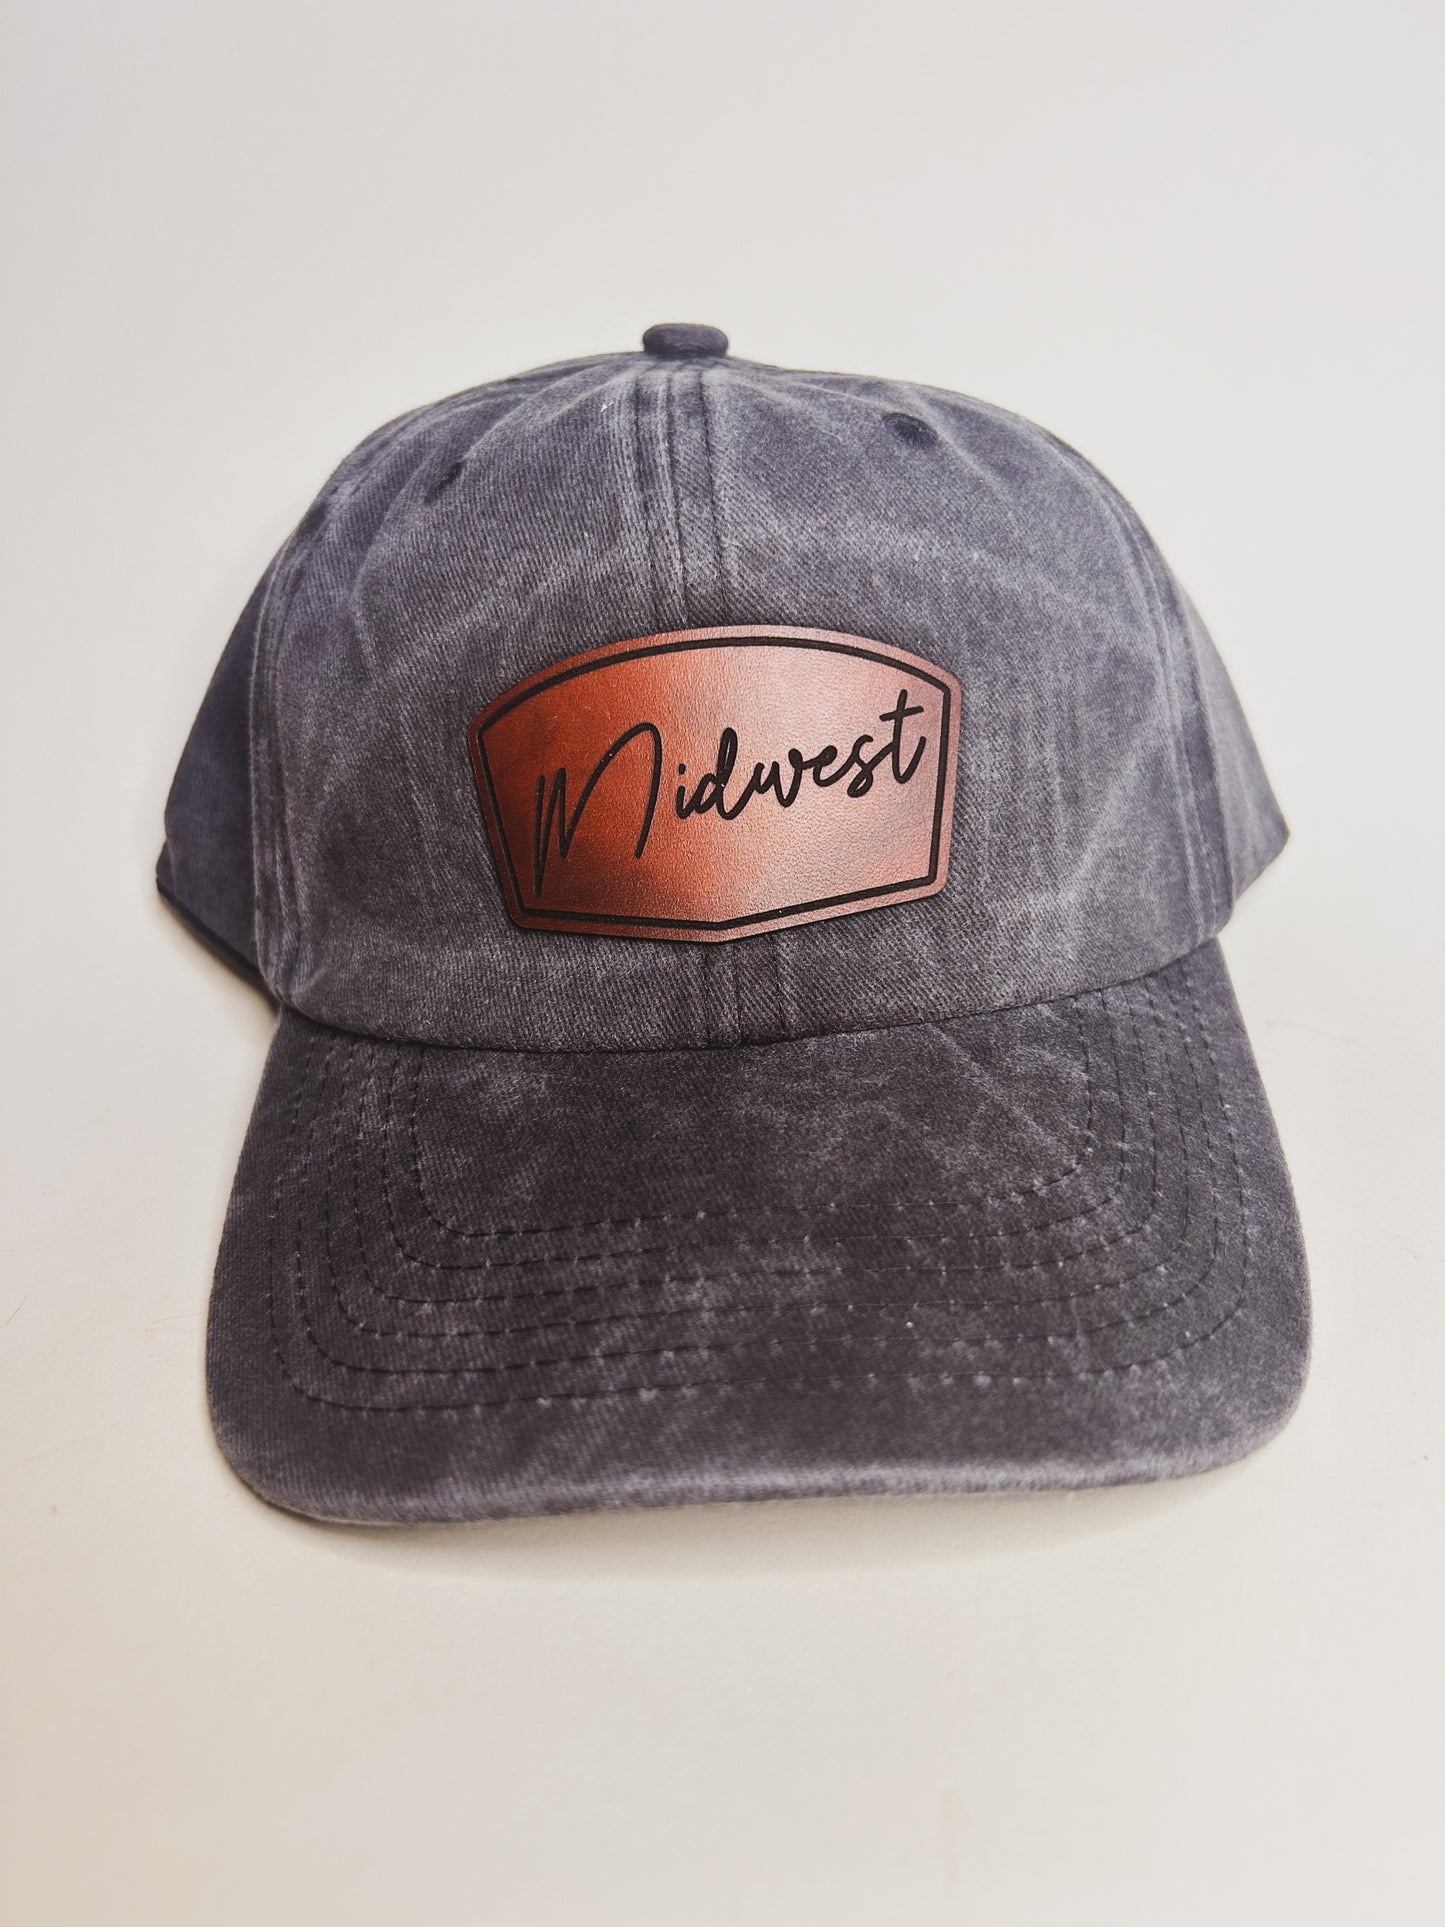 Midwest Patch on Black Baseball Hat